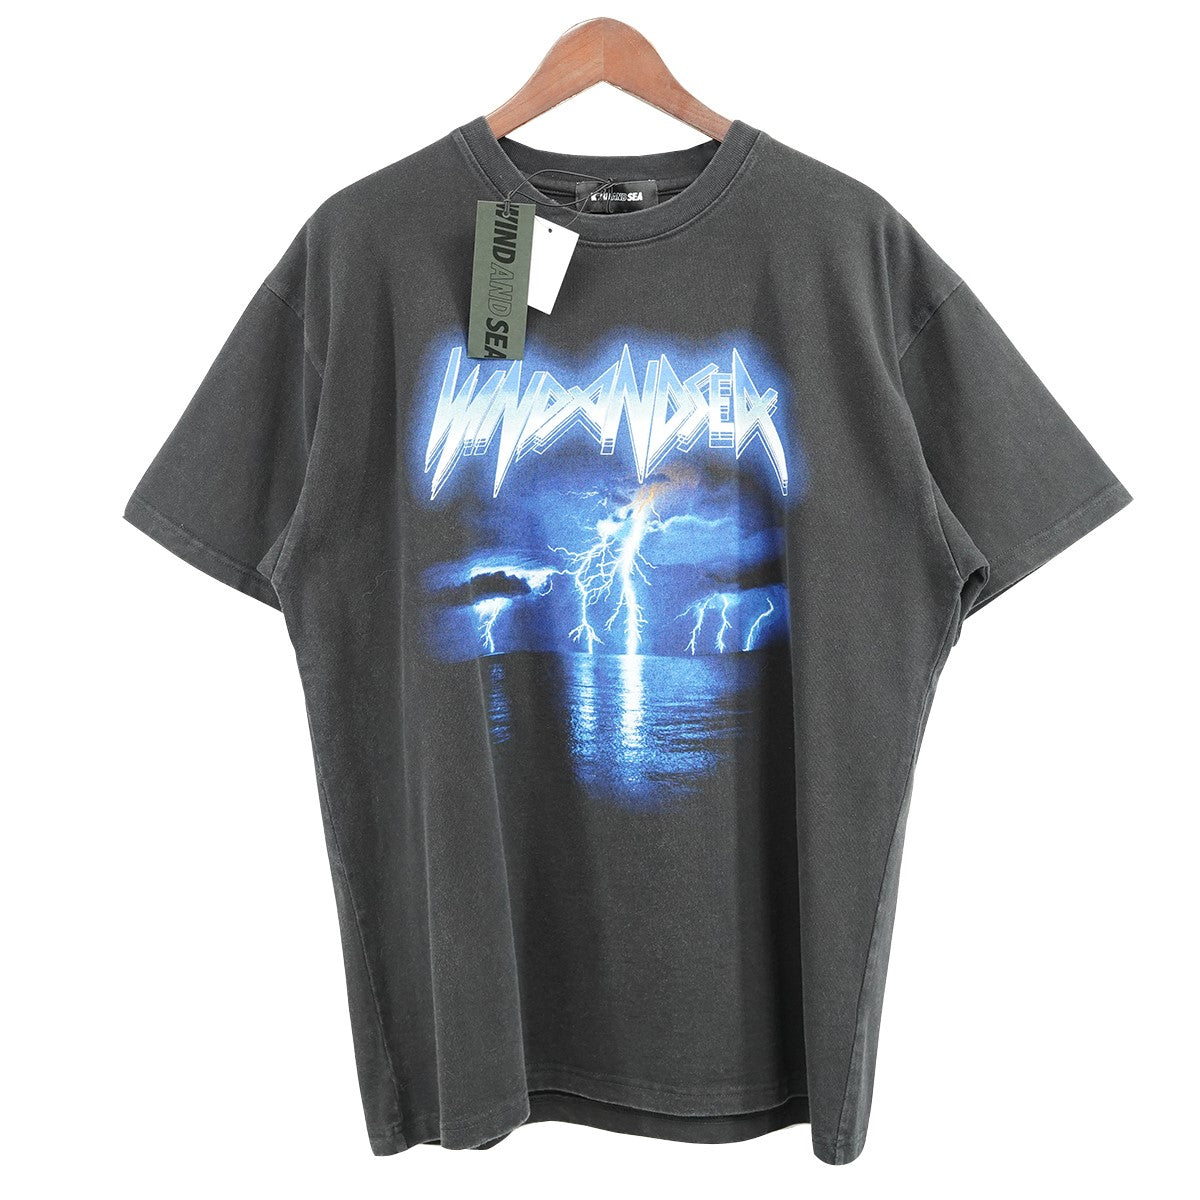 WIND AND SEA(ウィンドアンドシー) 23AW Metal Tee メタル ロゴ ツアー